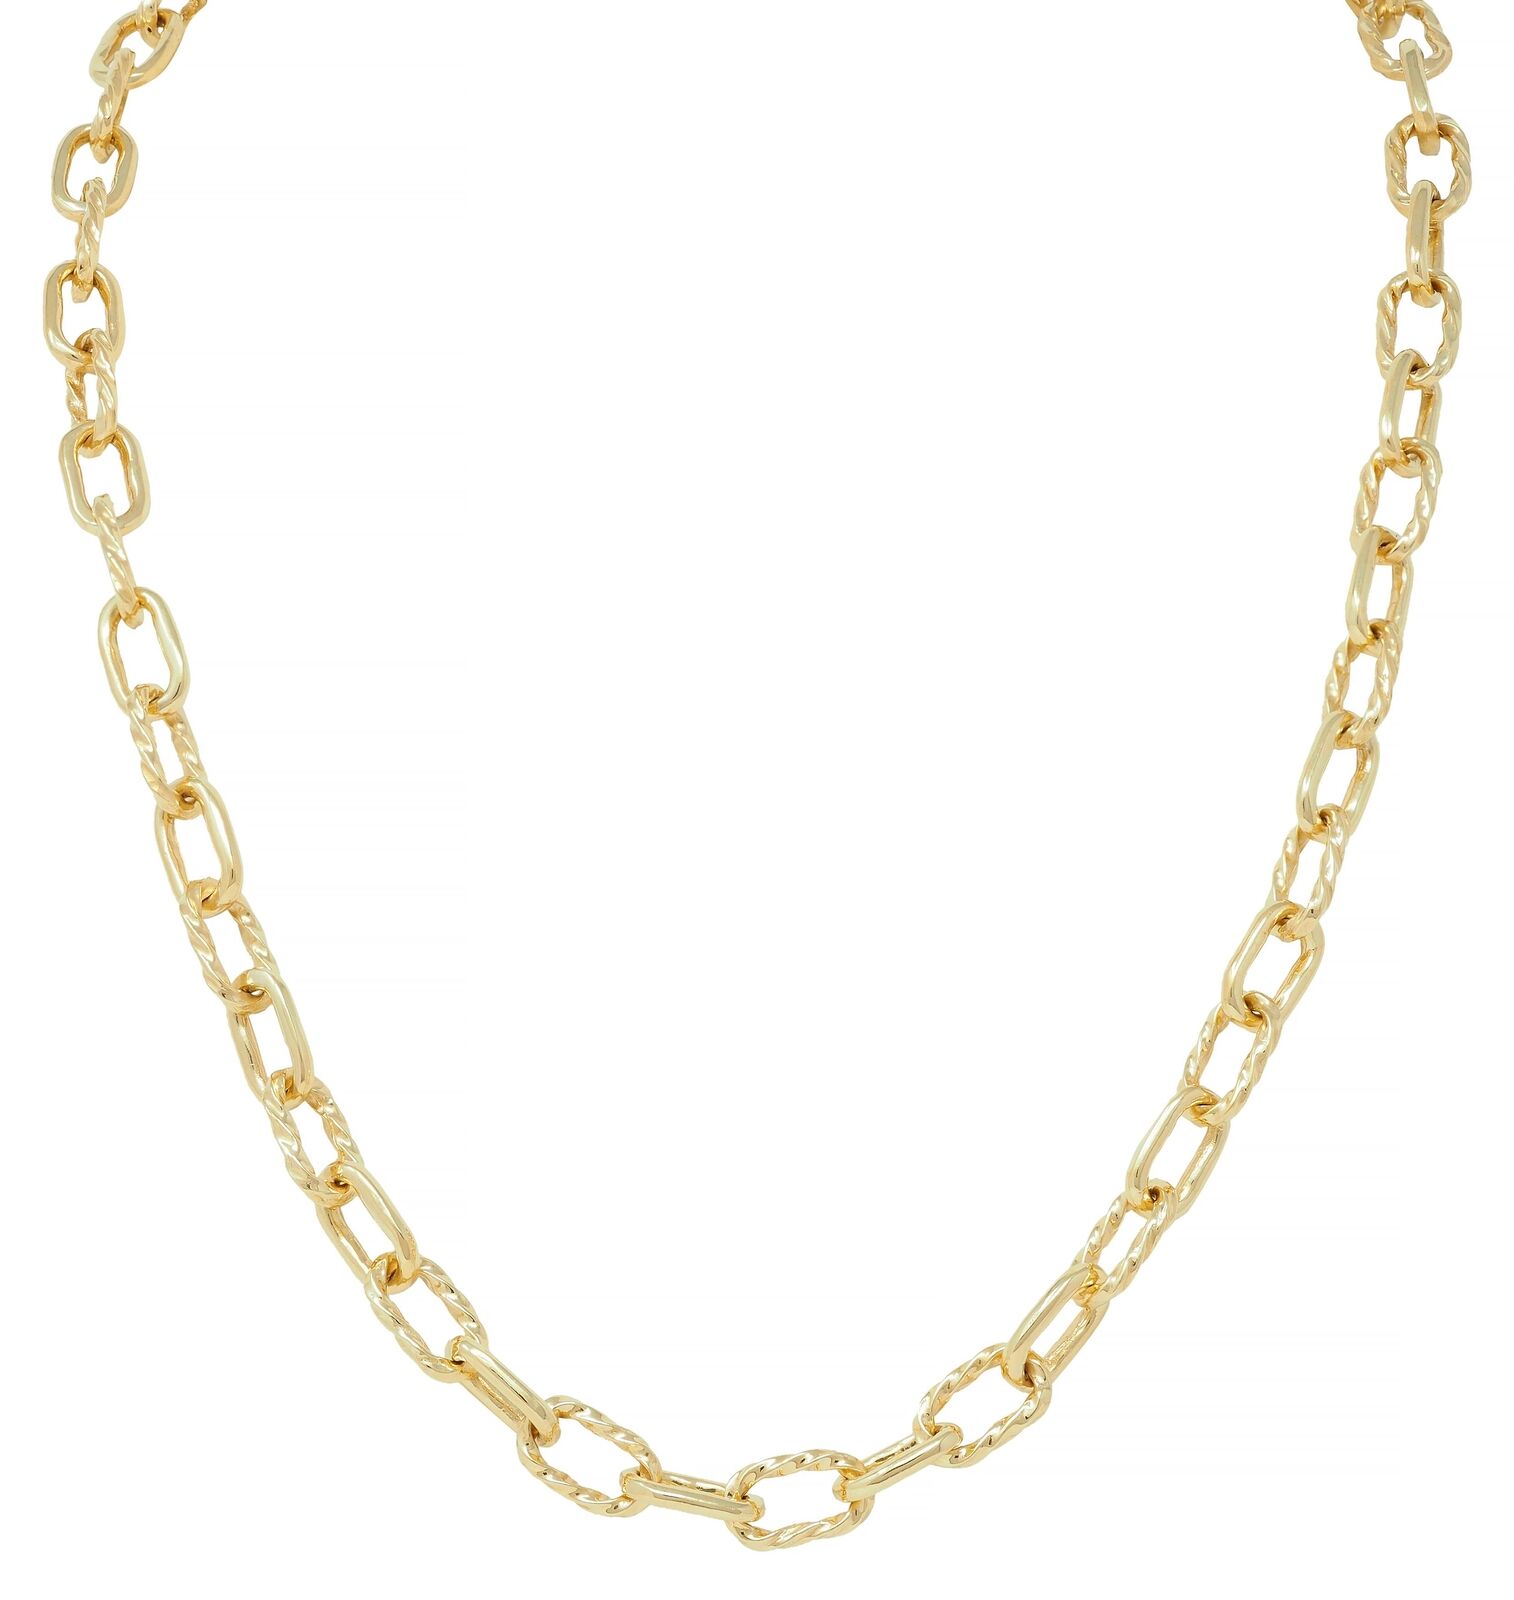 1960's 18 Karat Yellow Gold Twisted Cable Link Vintage Chain Necklace